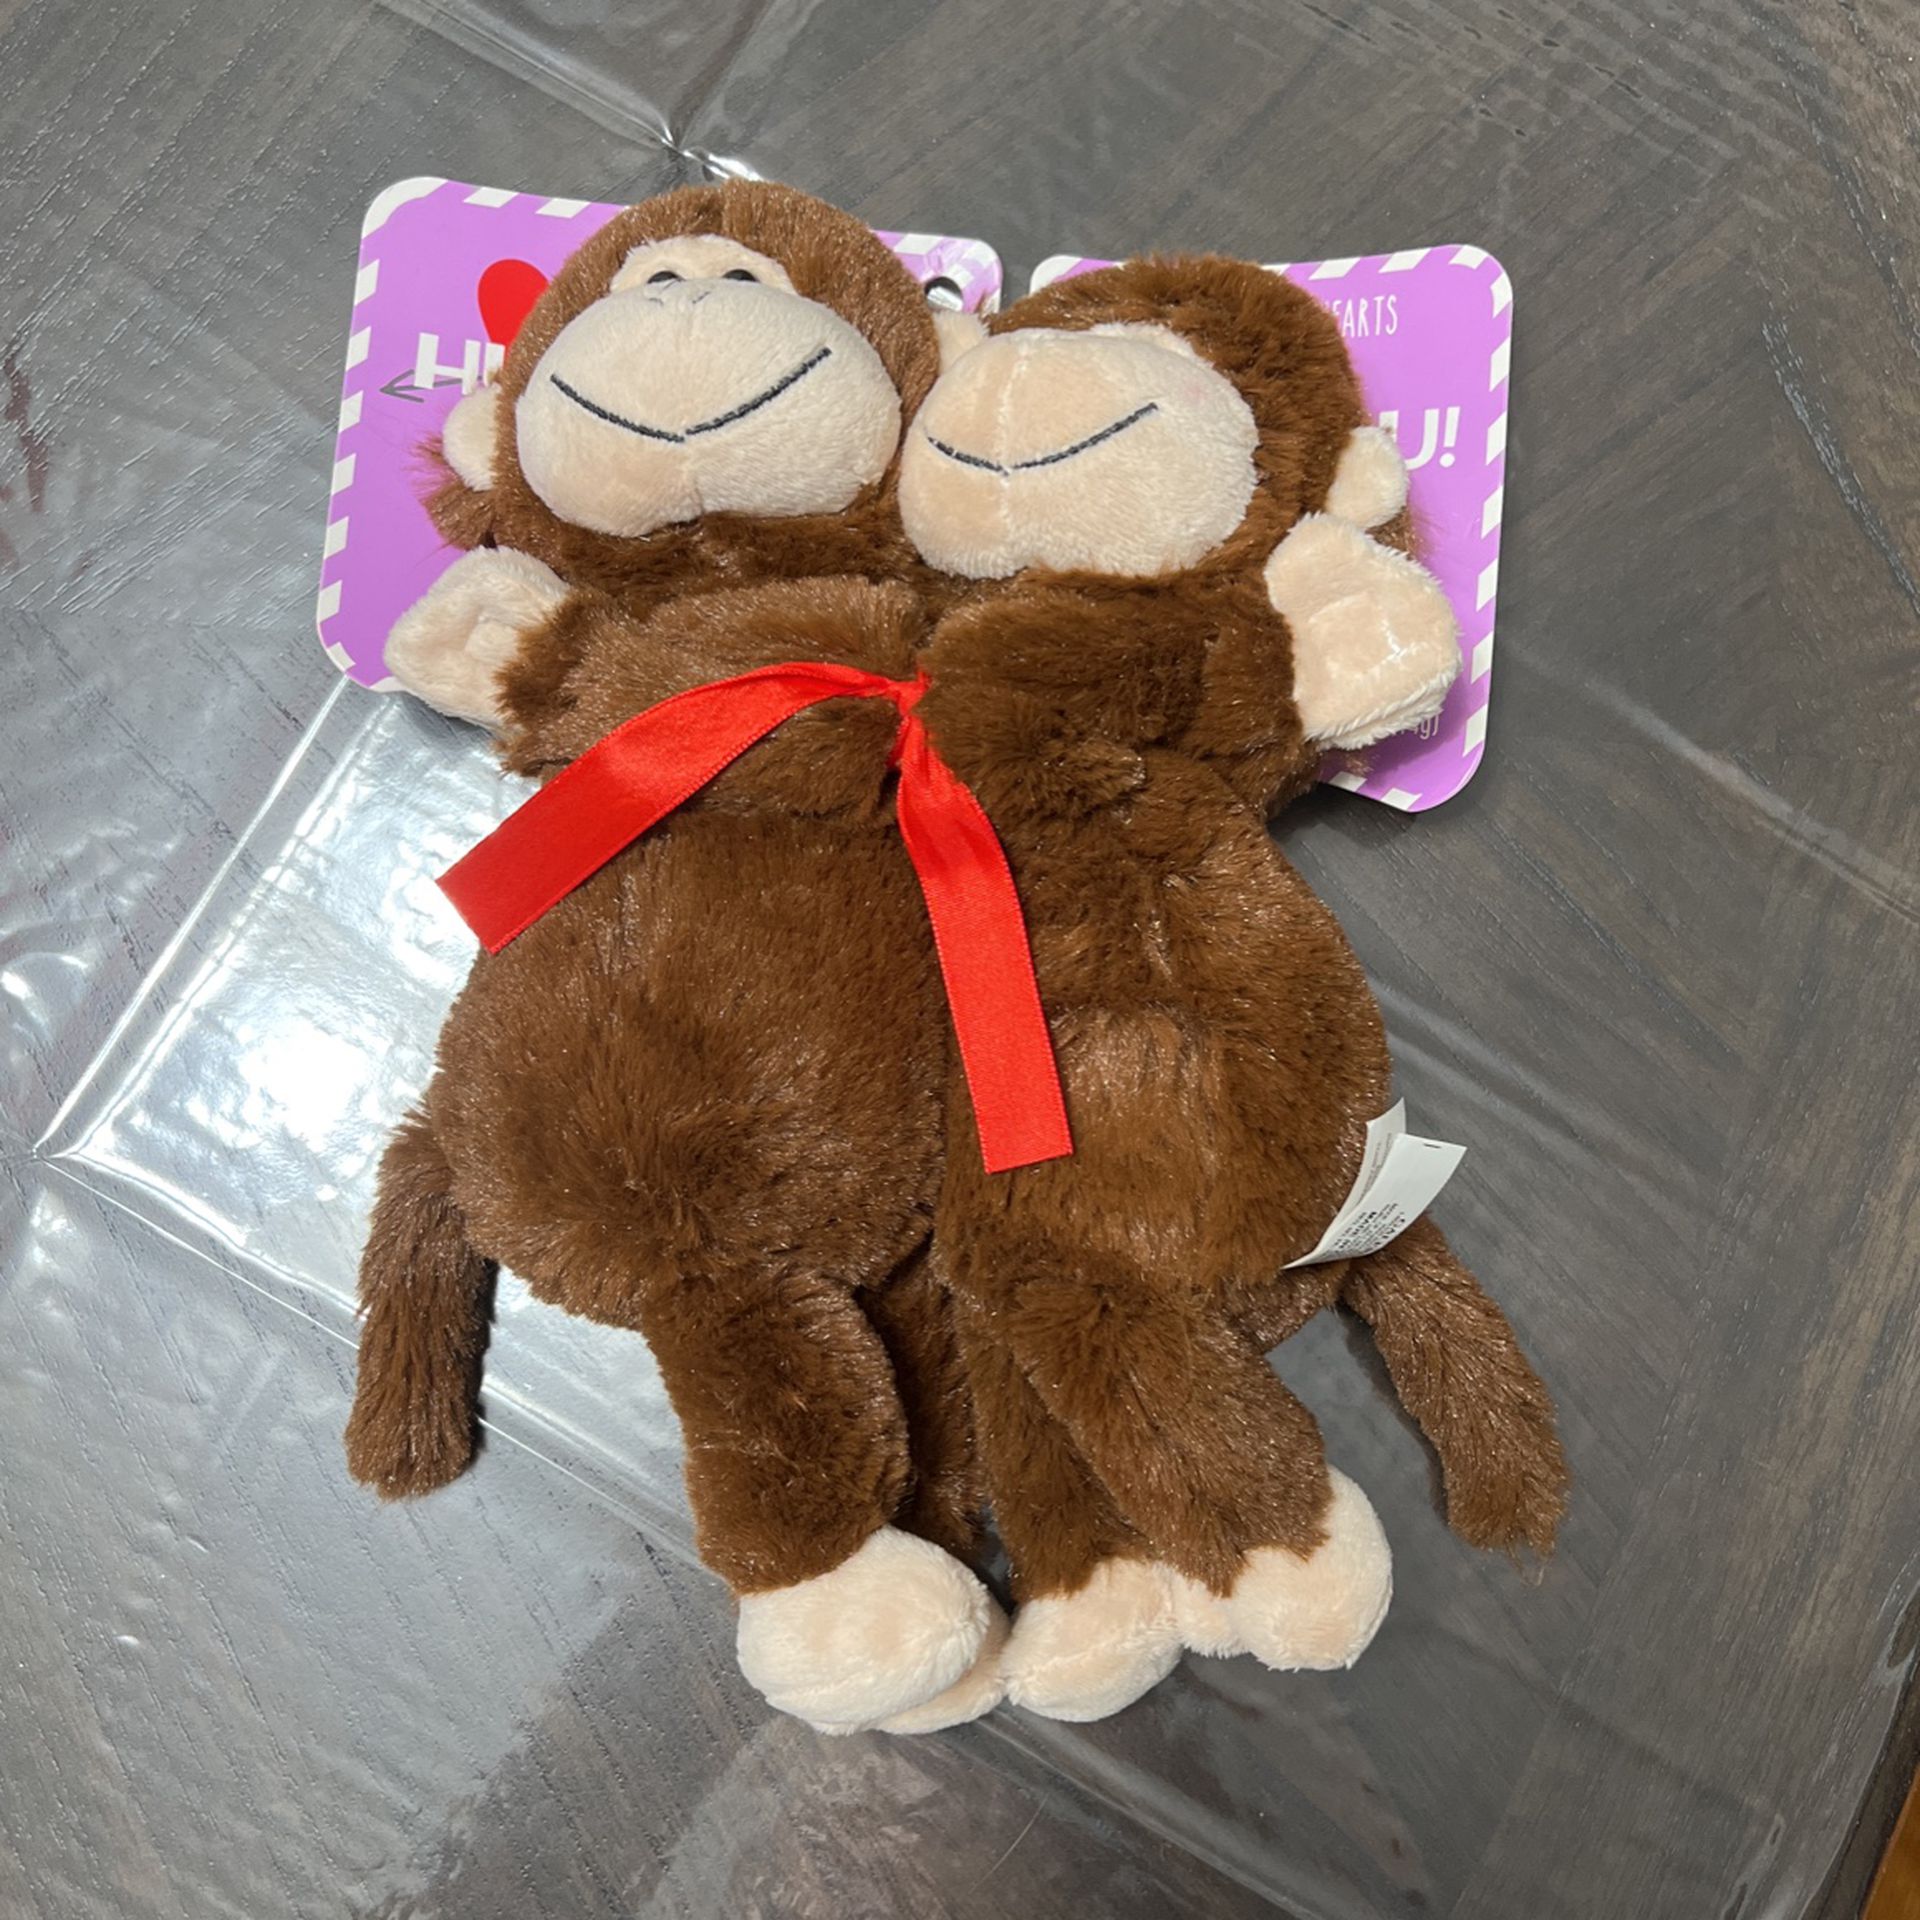 To let a monkey soft toy 